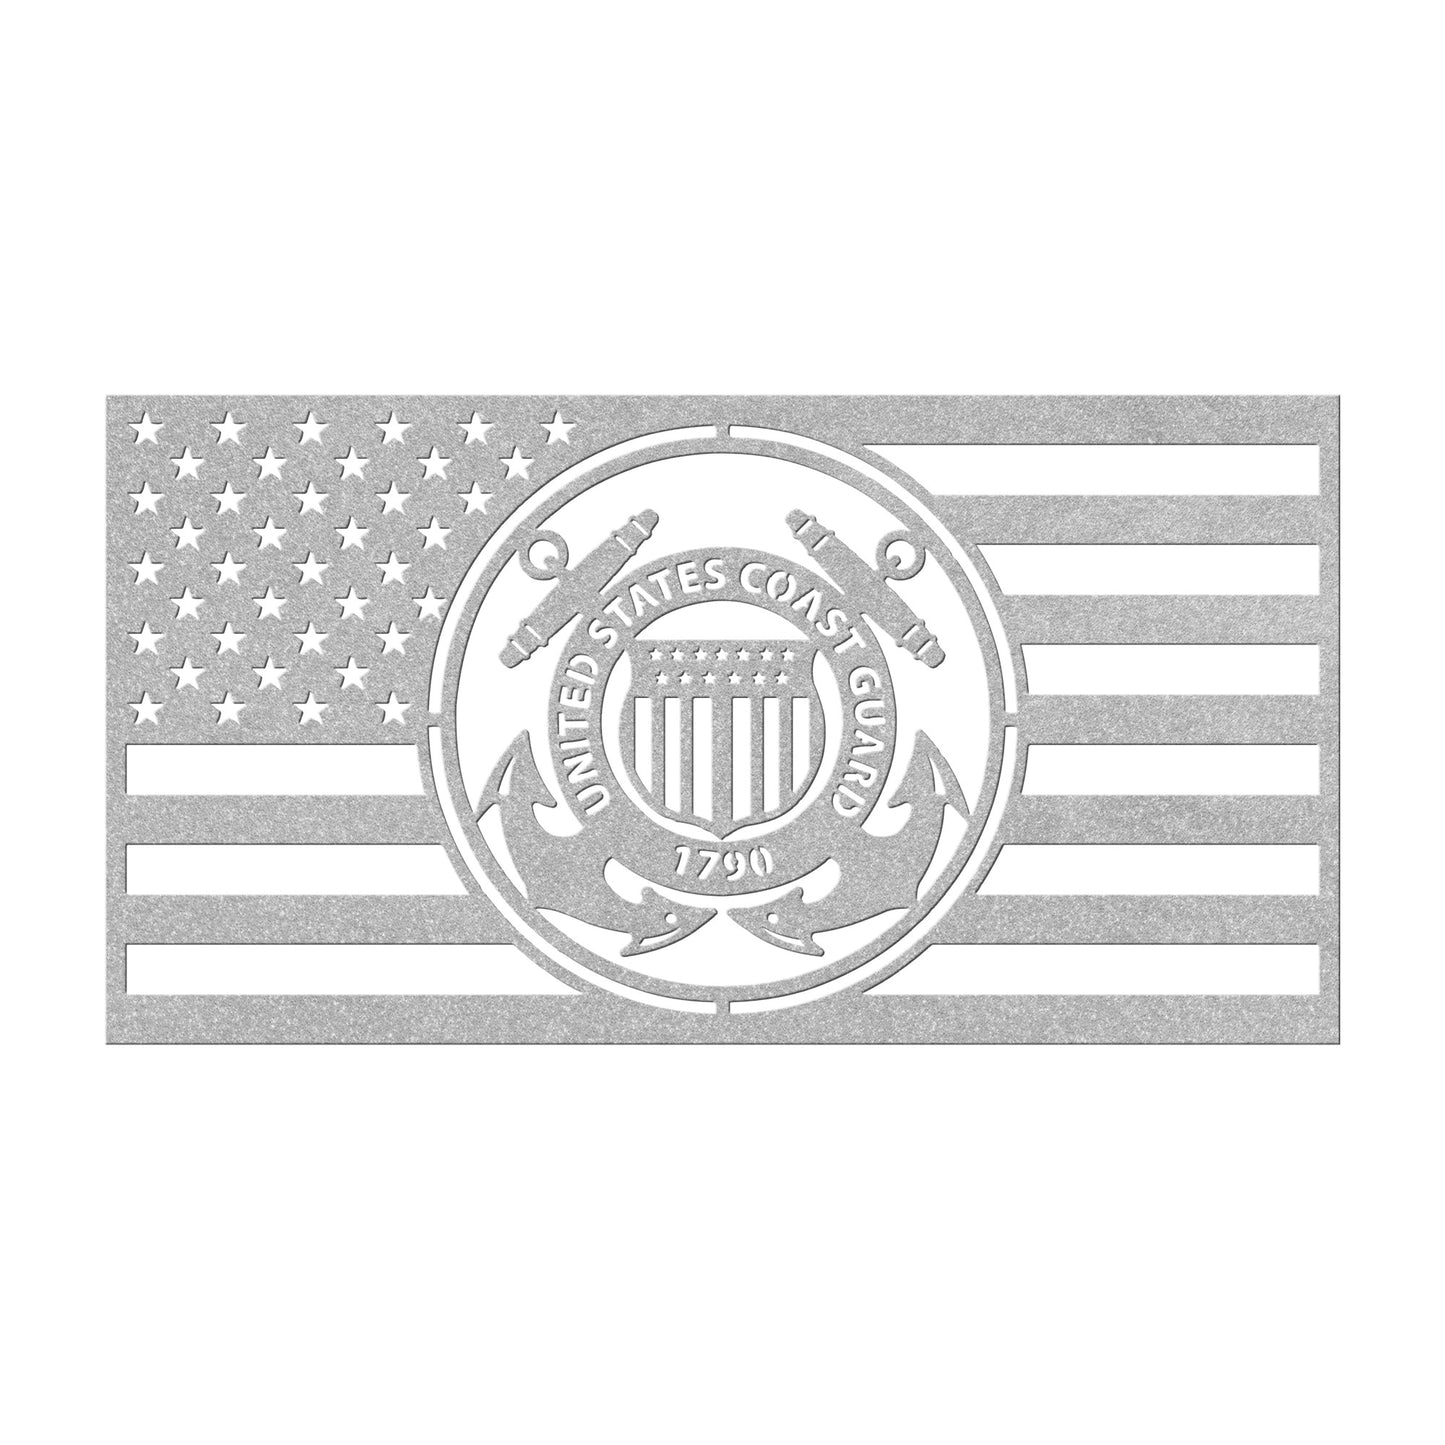 United States Coast Guard Themed American Flag - Made in USA - Military Decor